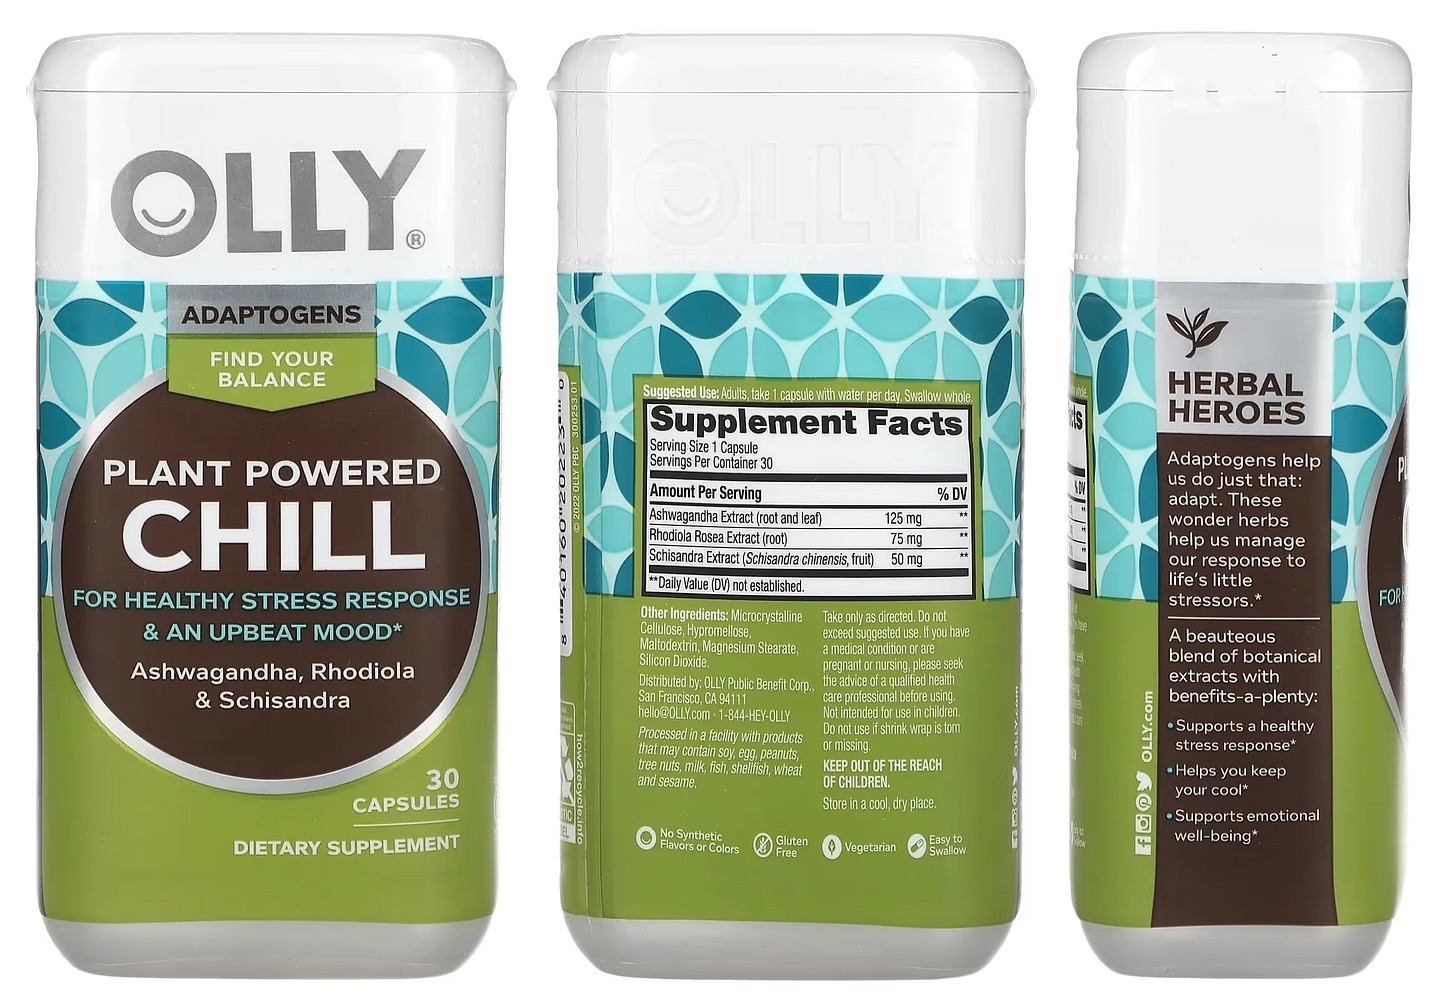 OLLY, Plant Powered Chill packaging